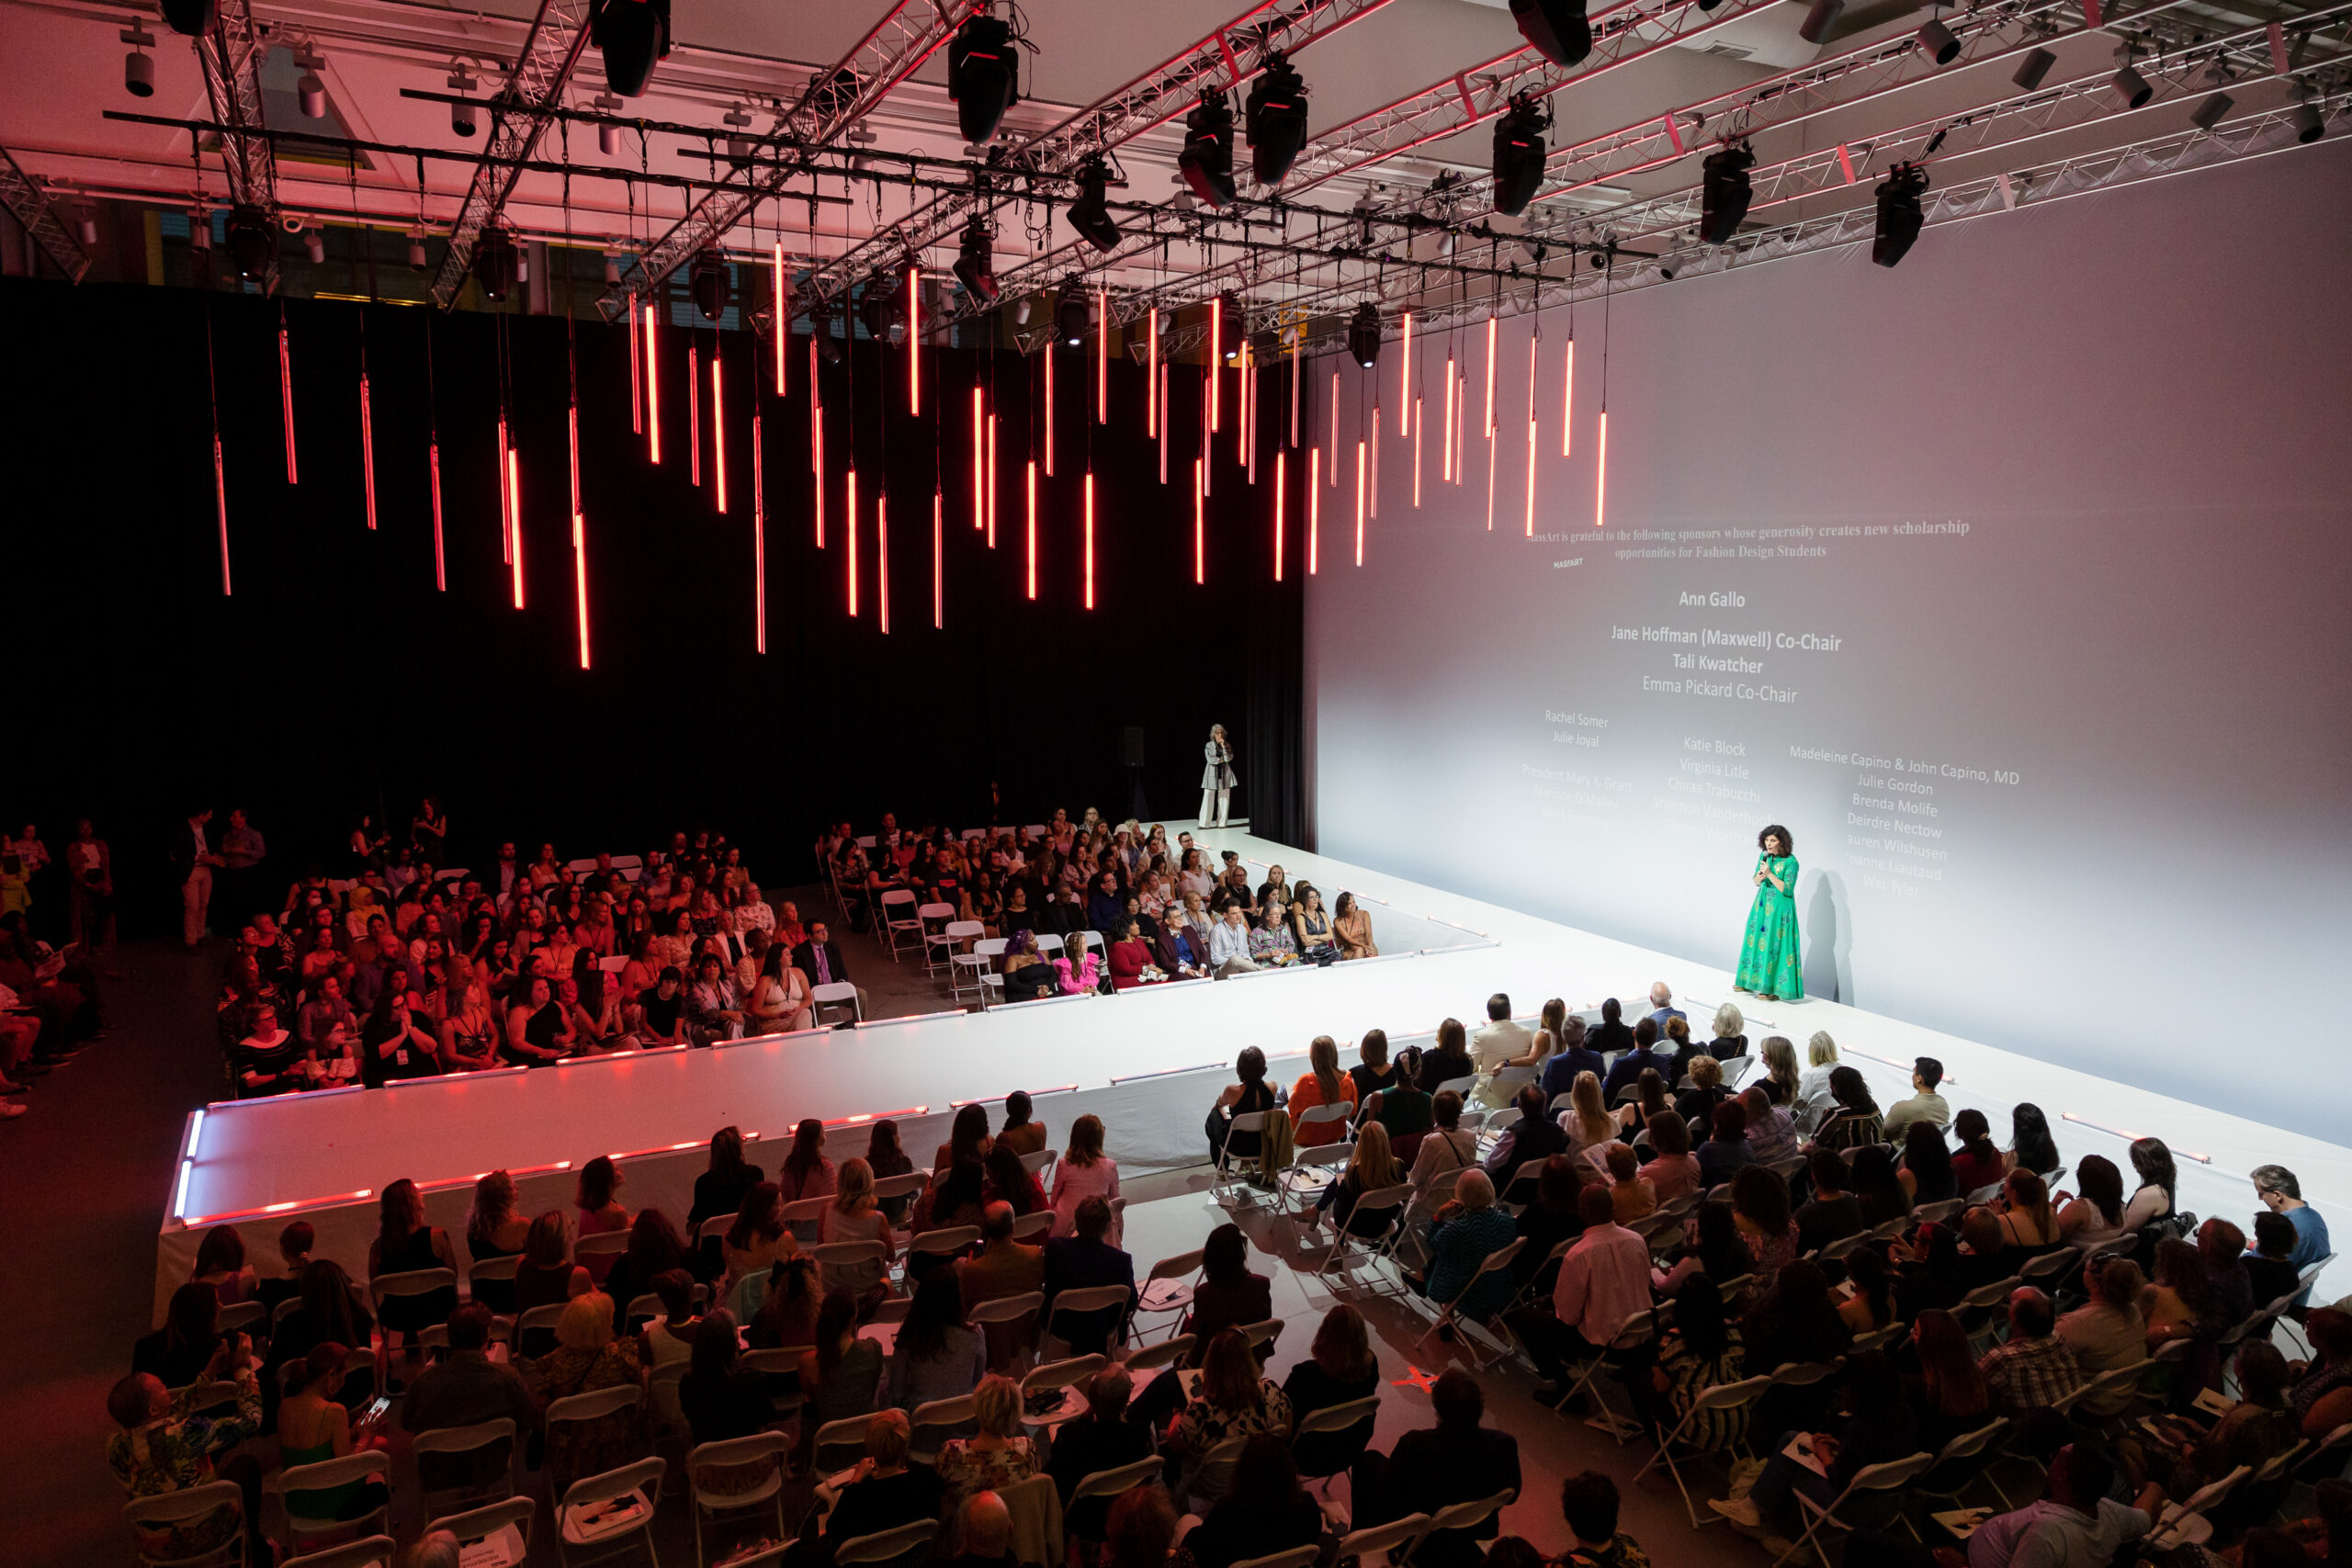 MassArt's Design and Media Center staged with a Fashion runway and a packed audience.